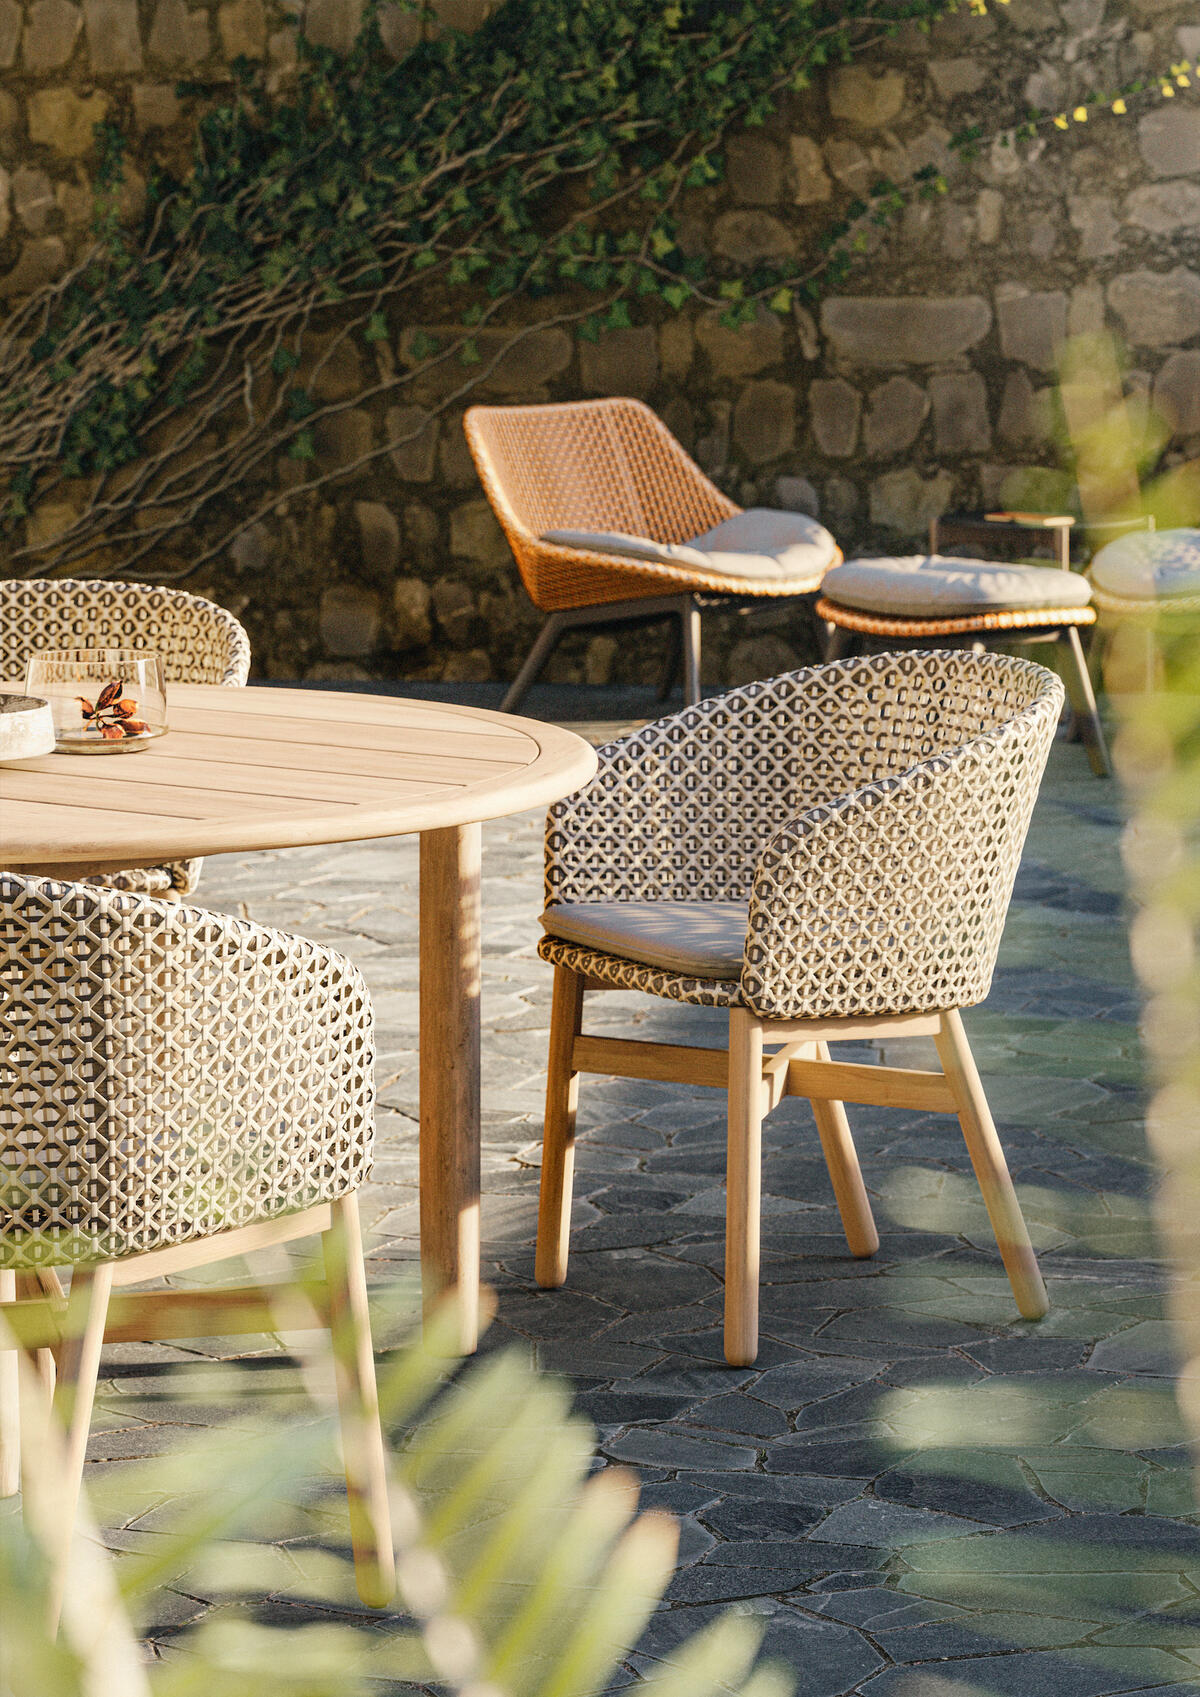 Dedon’s outdoor furniture is for now and the future